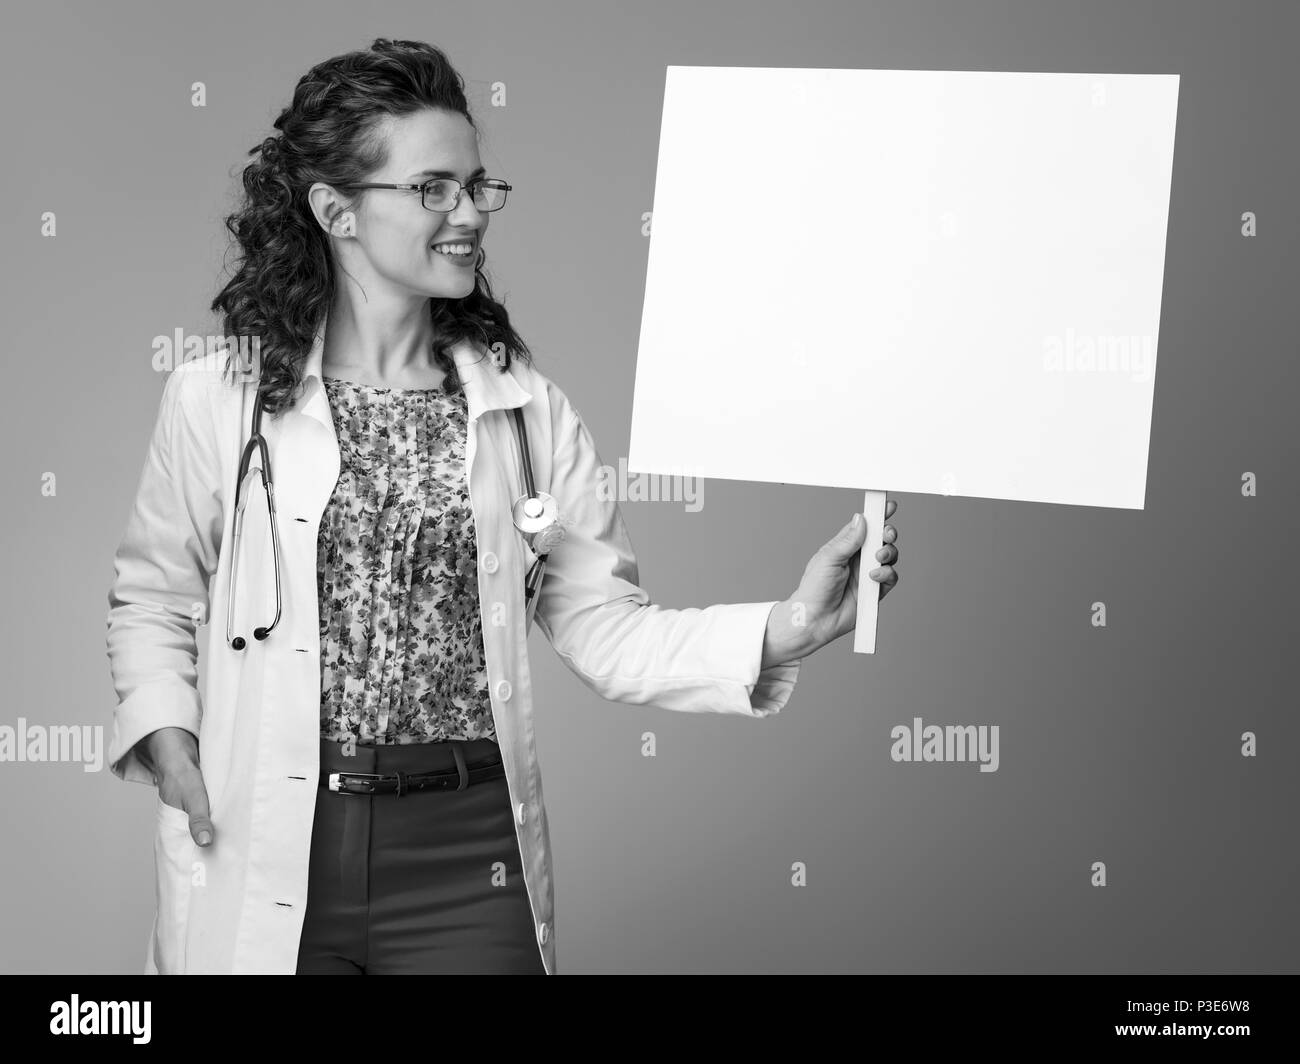 smiling paediatrician woman in white medical robe looking at placard against background Stock Photo